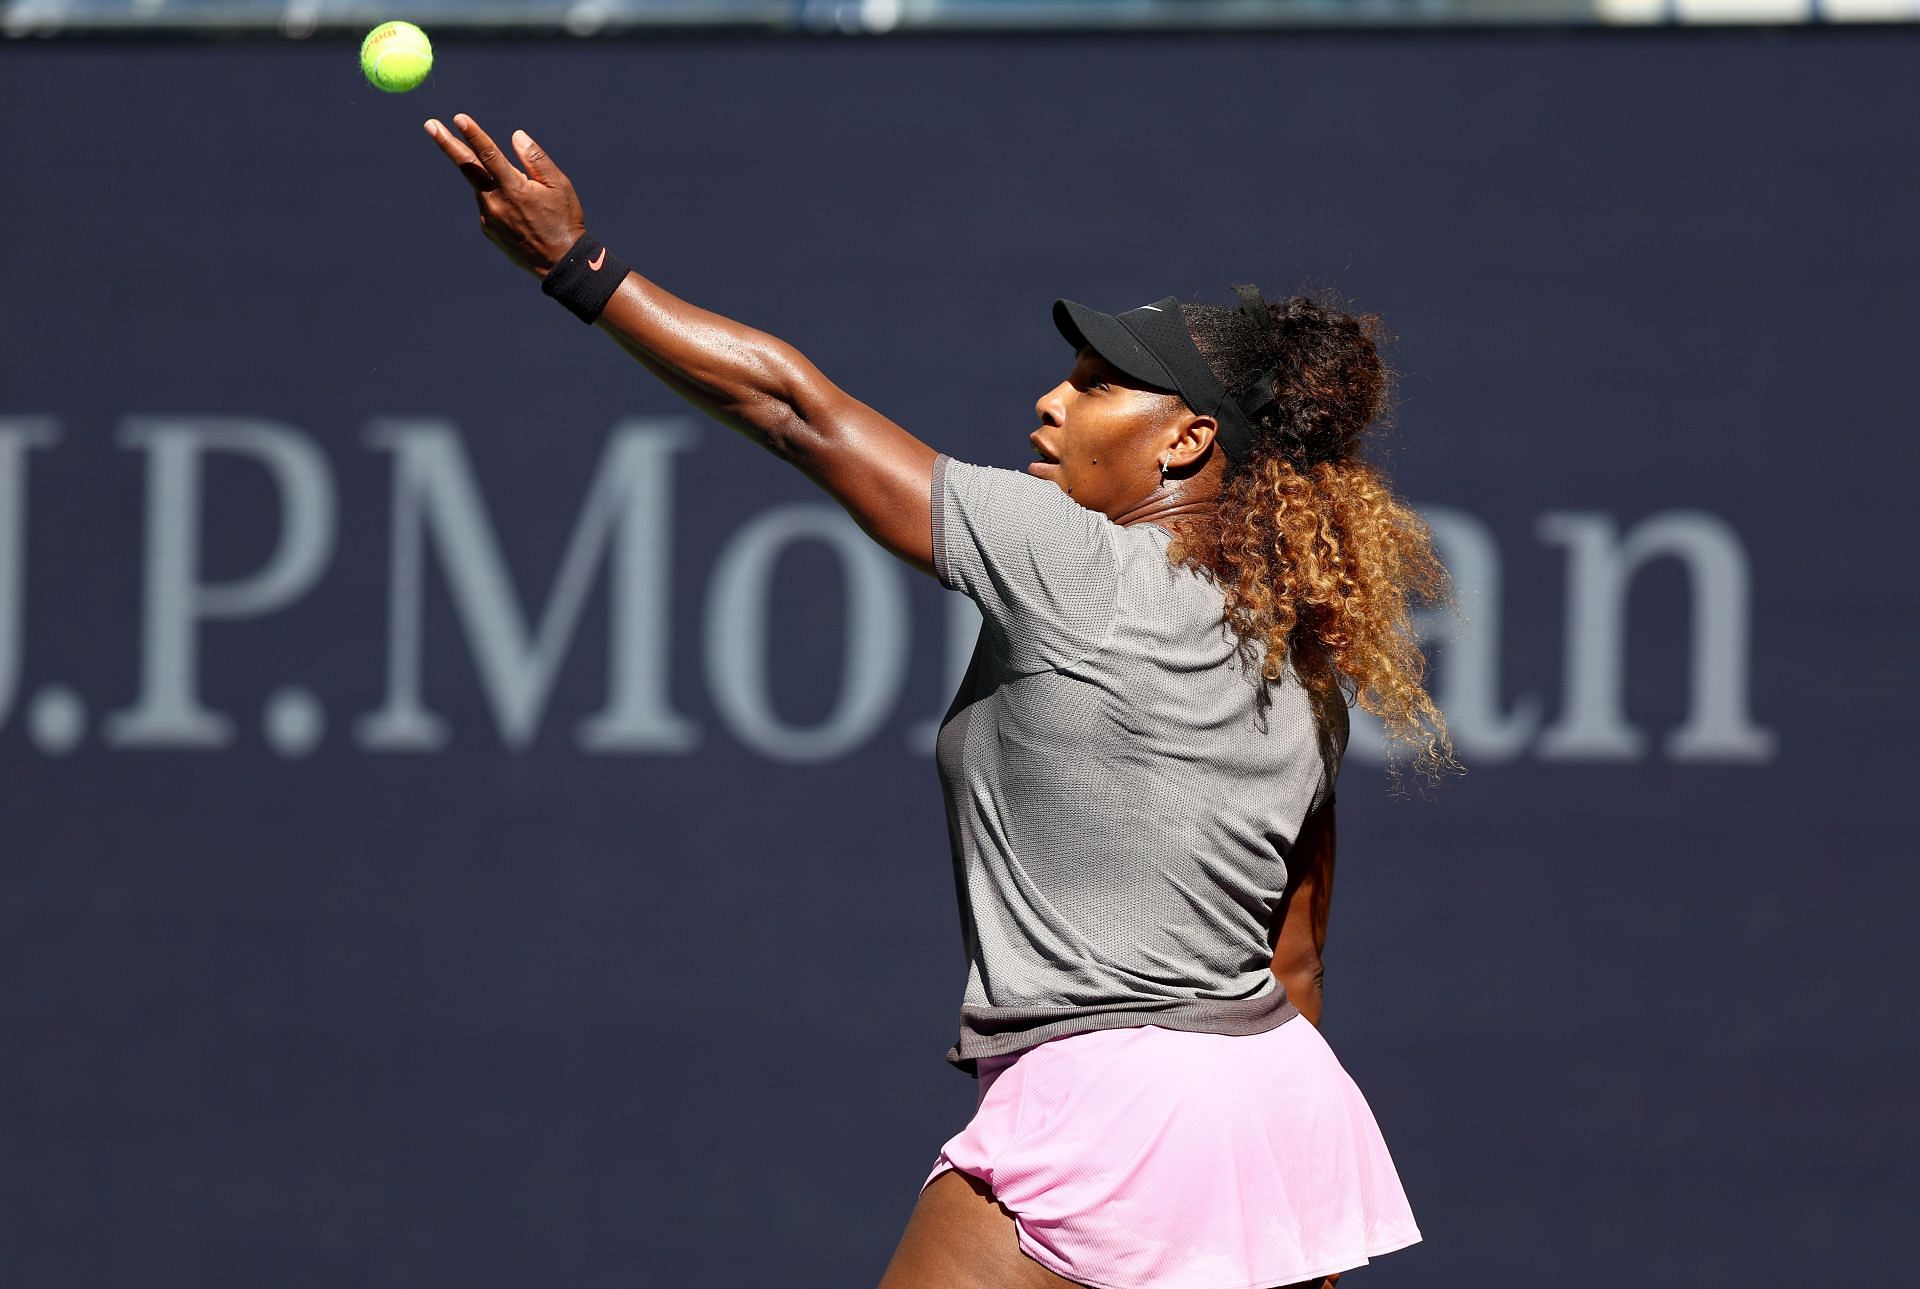 Serena Williams serves during her practice session in the US Open